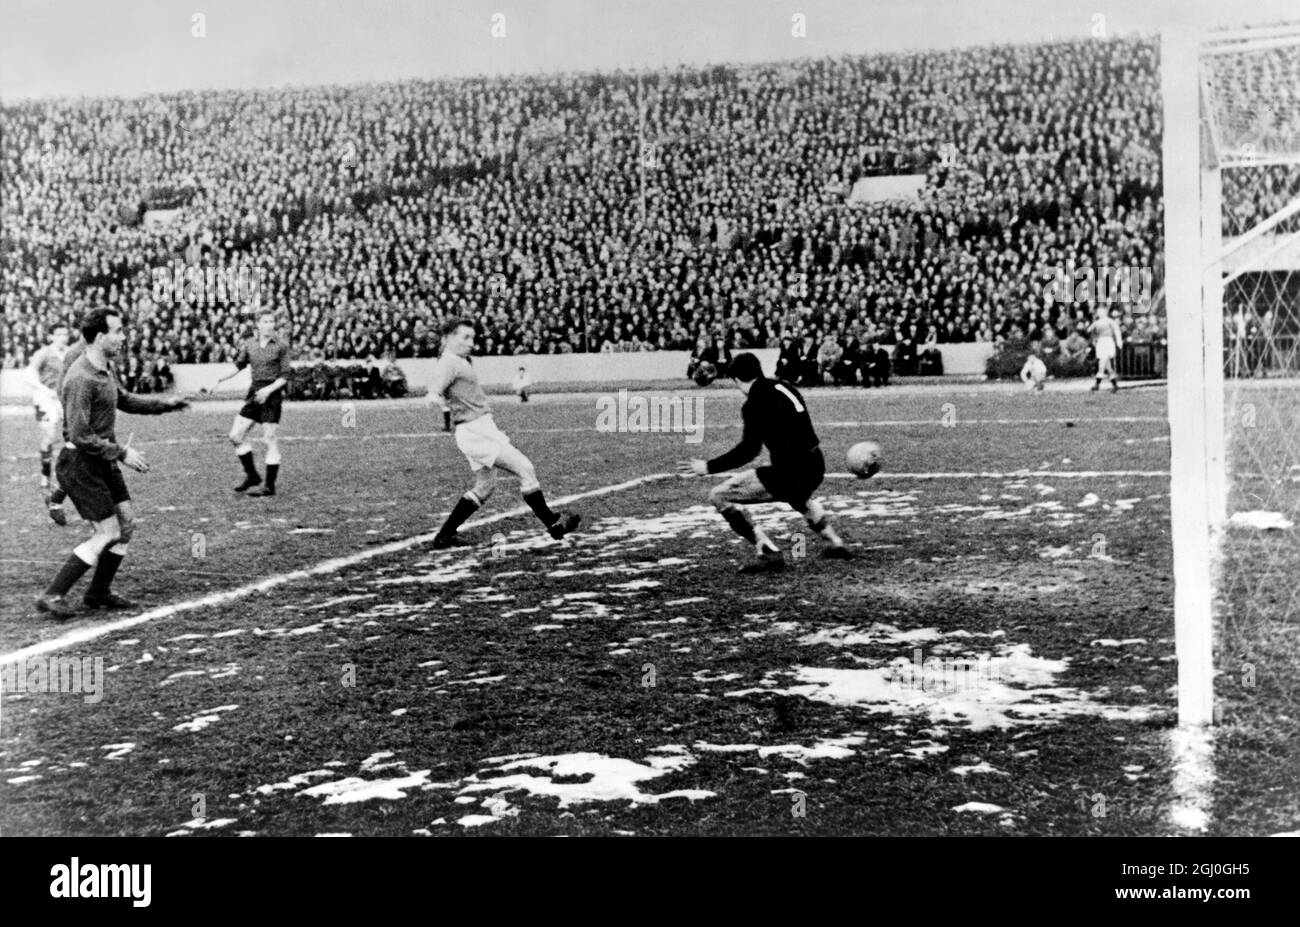 Red Star Belgrade v Manchester United Manchester United's Bobby Charlton scoring his team's third goal in their European Cup match in Belgrade. 5th February 1958 Stock Photo